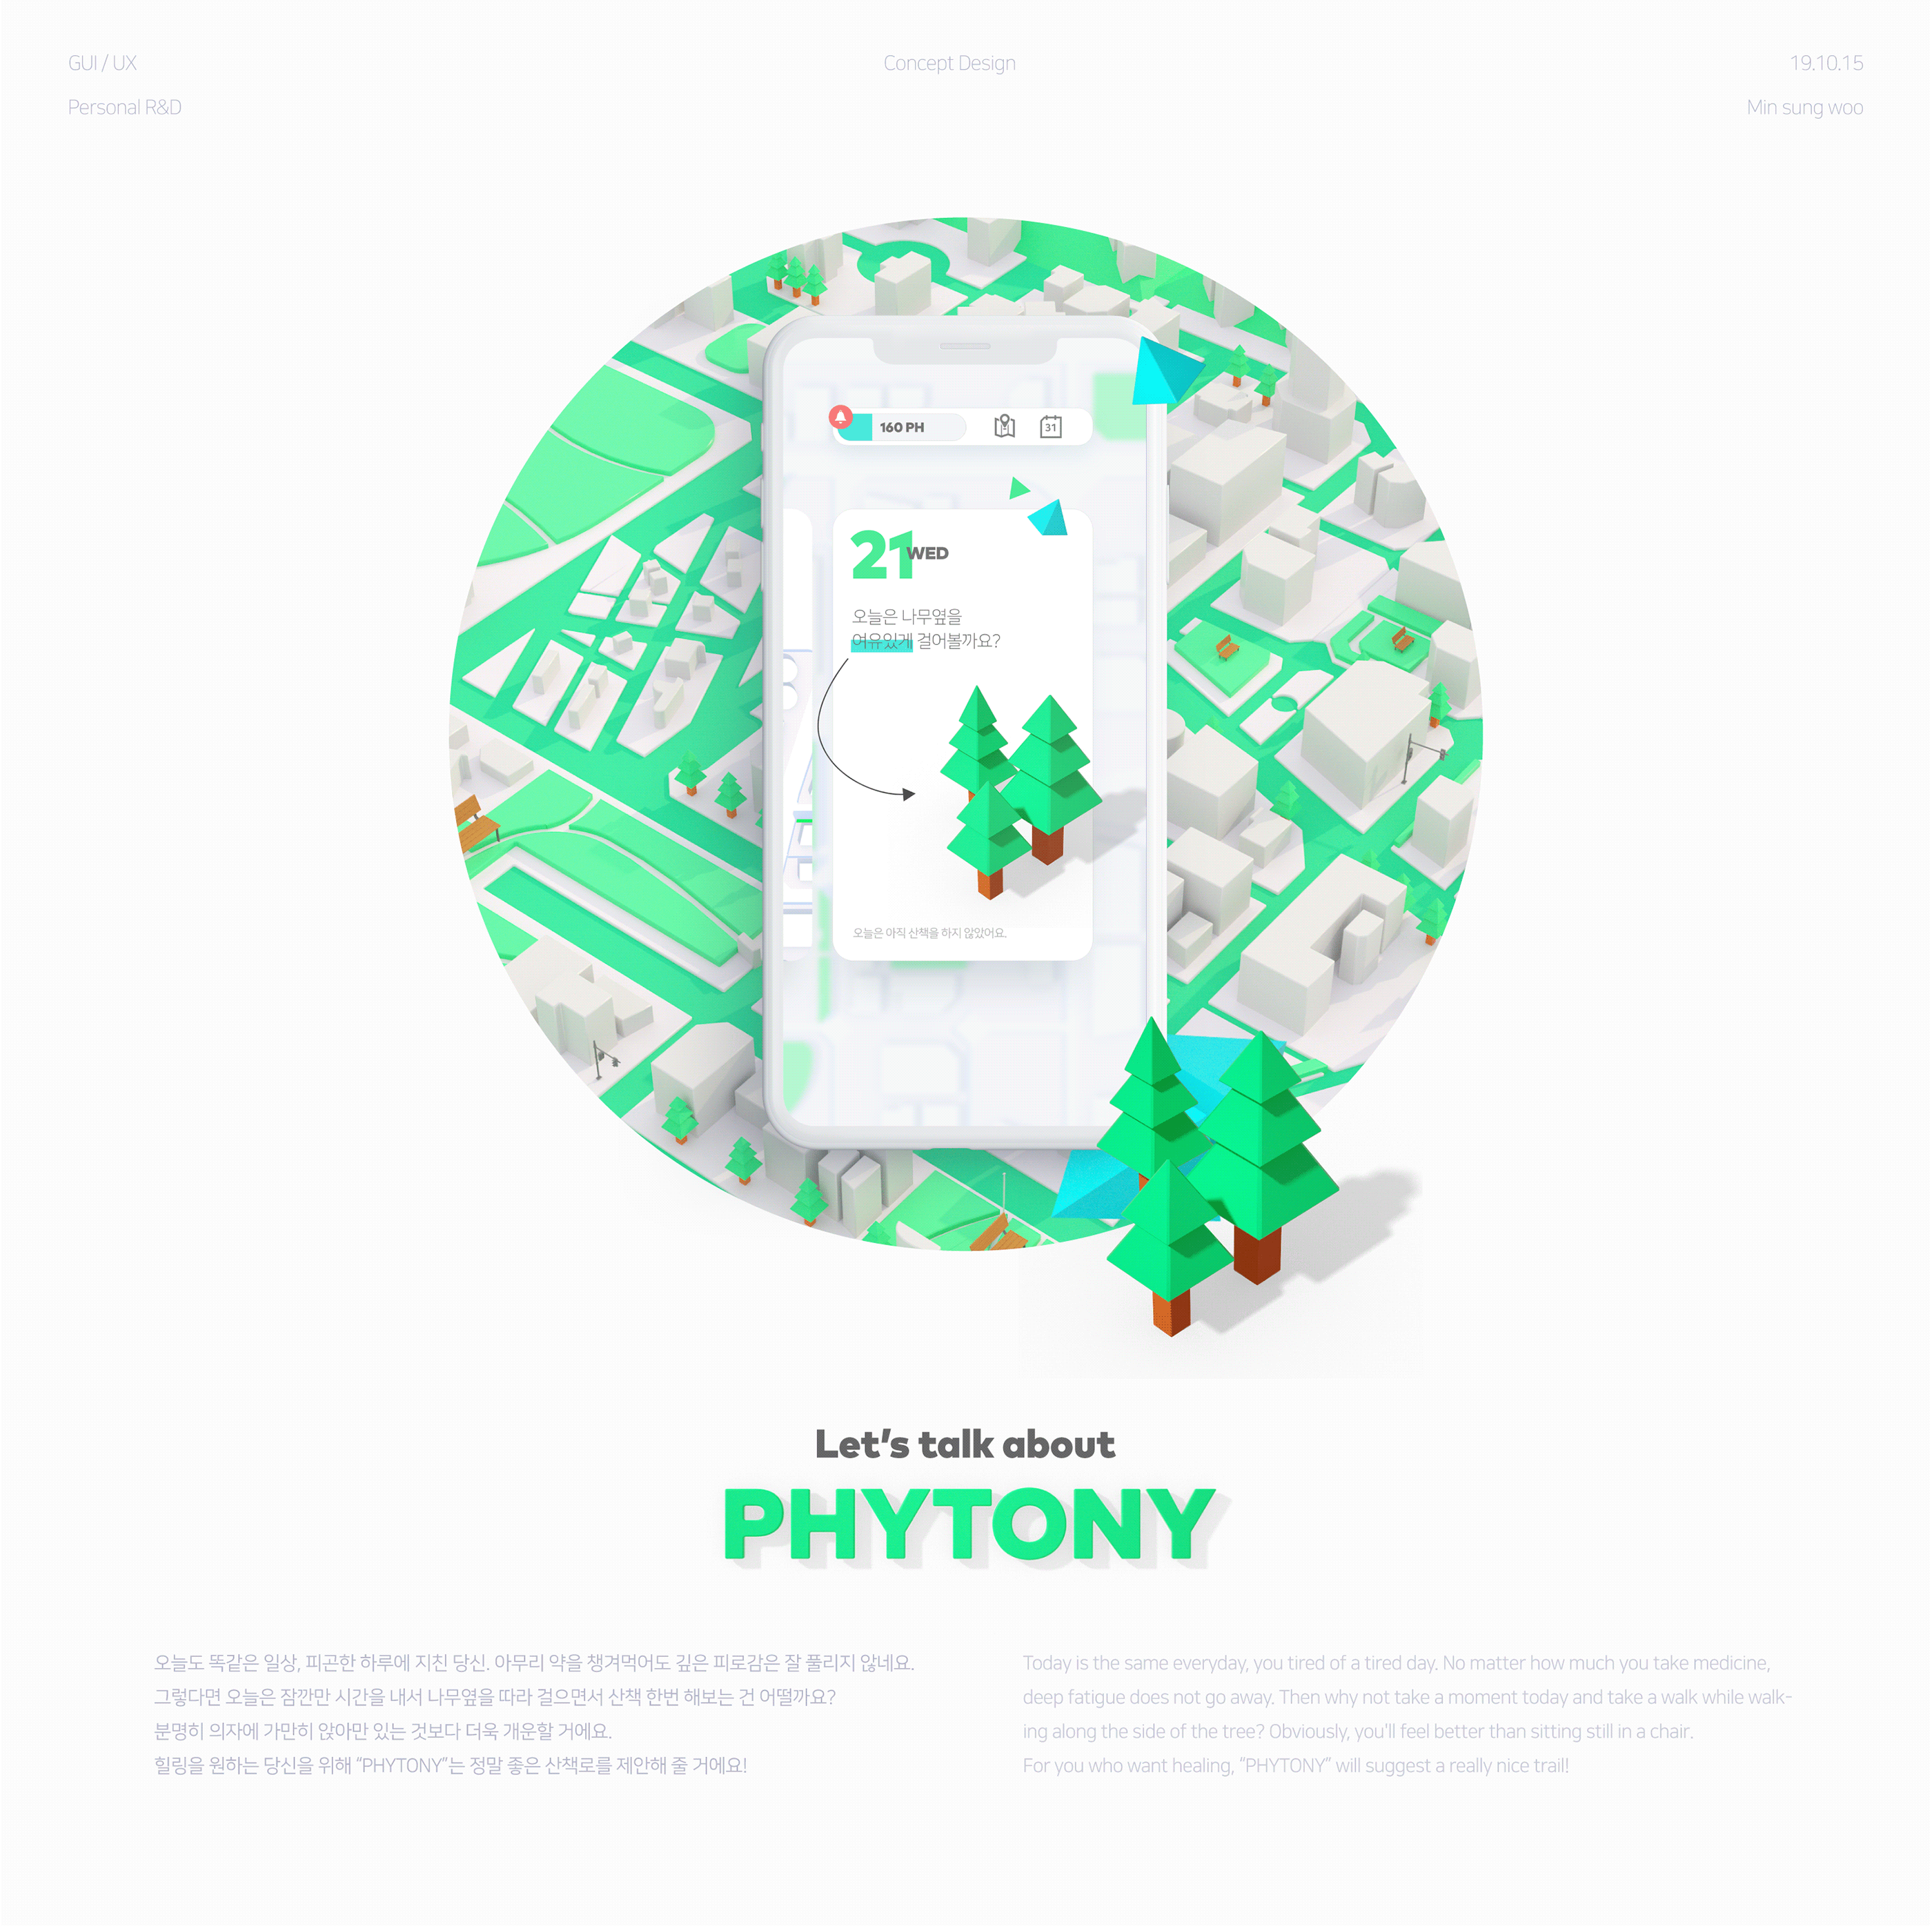 PHYTONY | Trail road map GUI on Behancee9272687020145.5dc48cade17f0.png